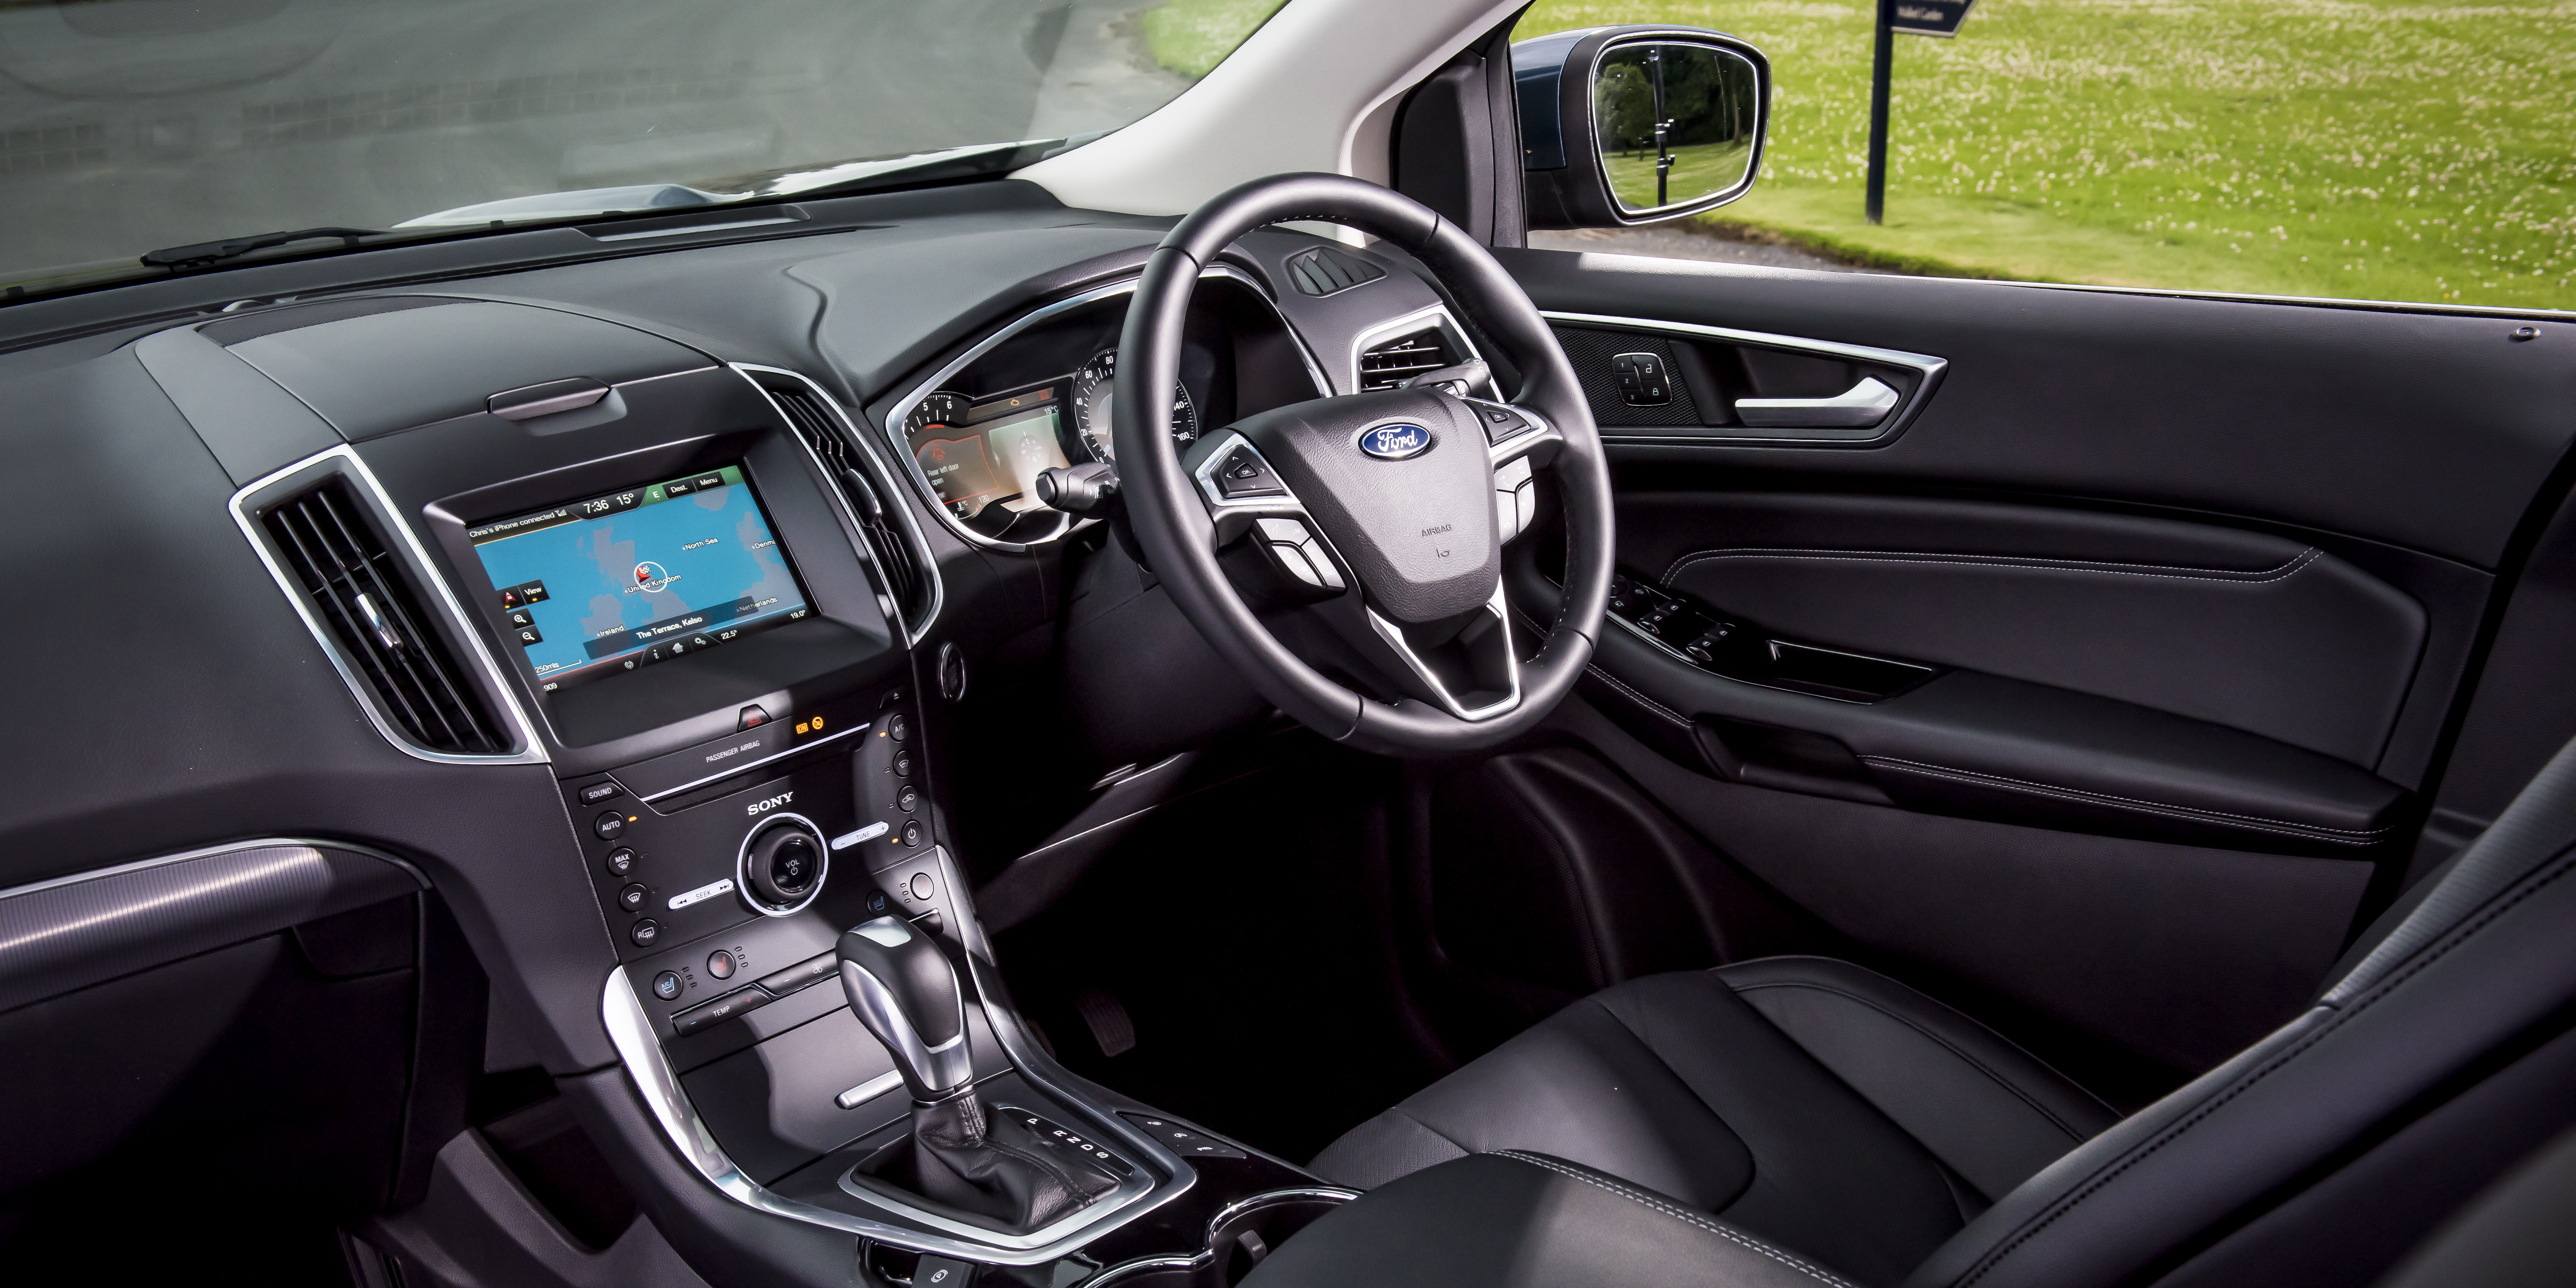 The cabin looks much smarter than  cheaper Ford models